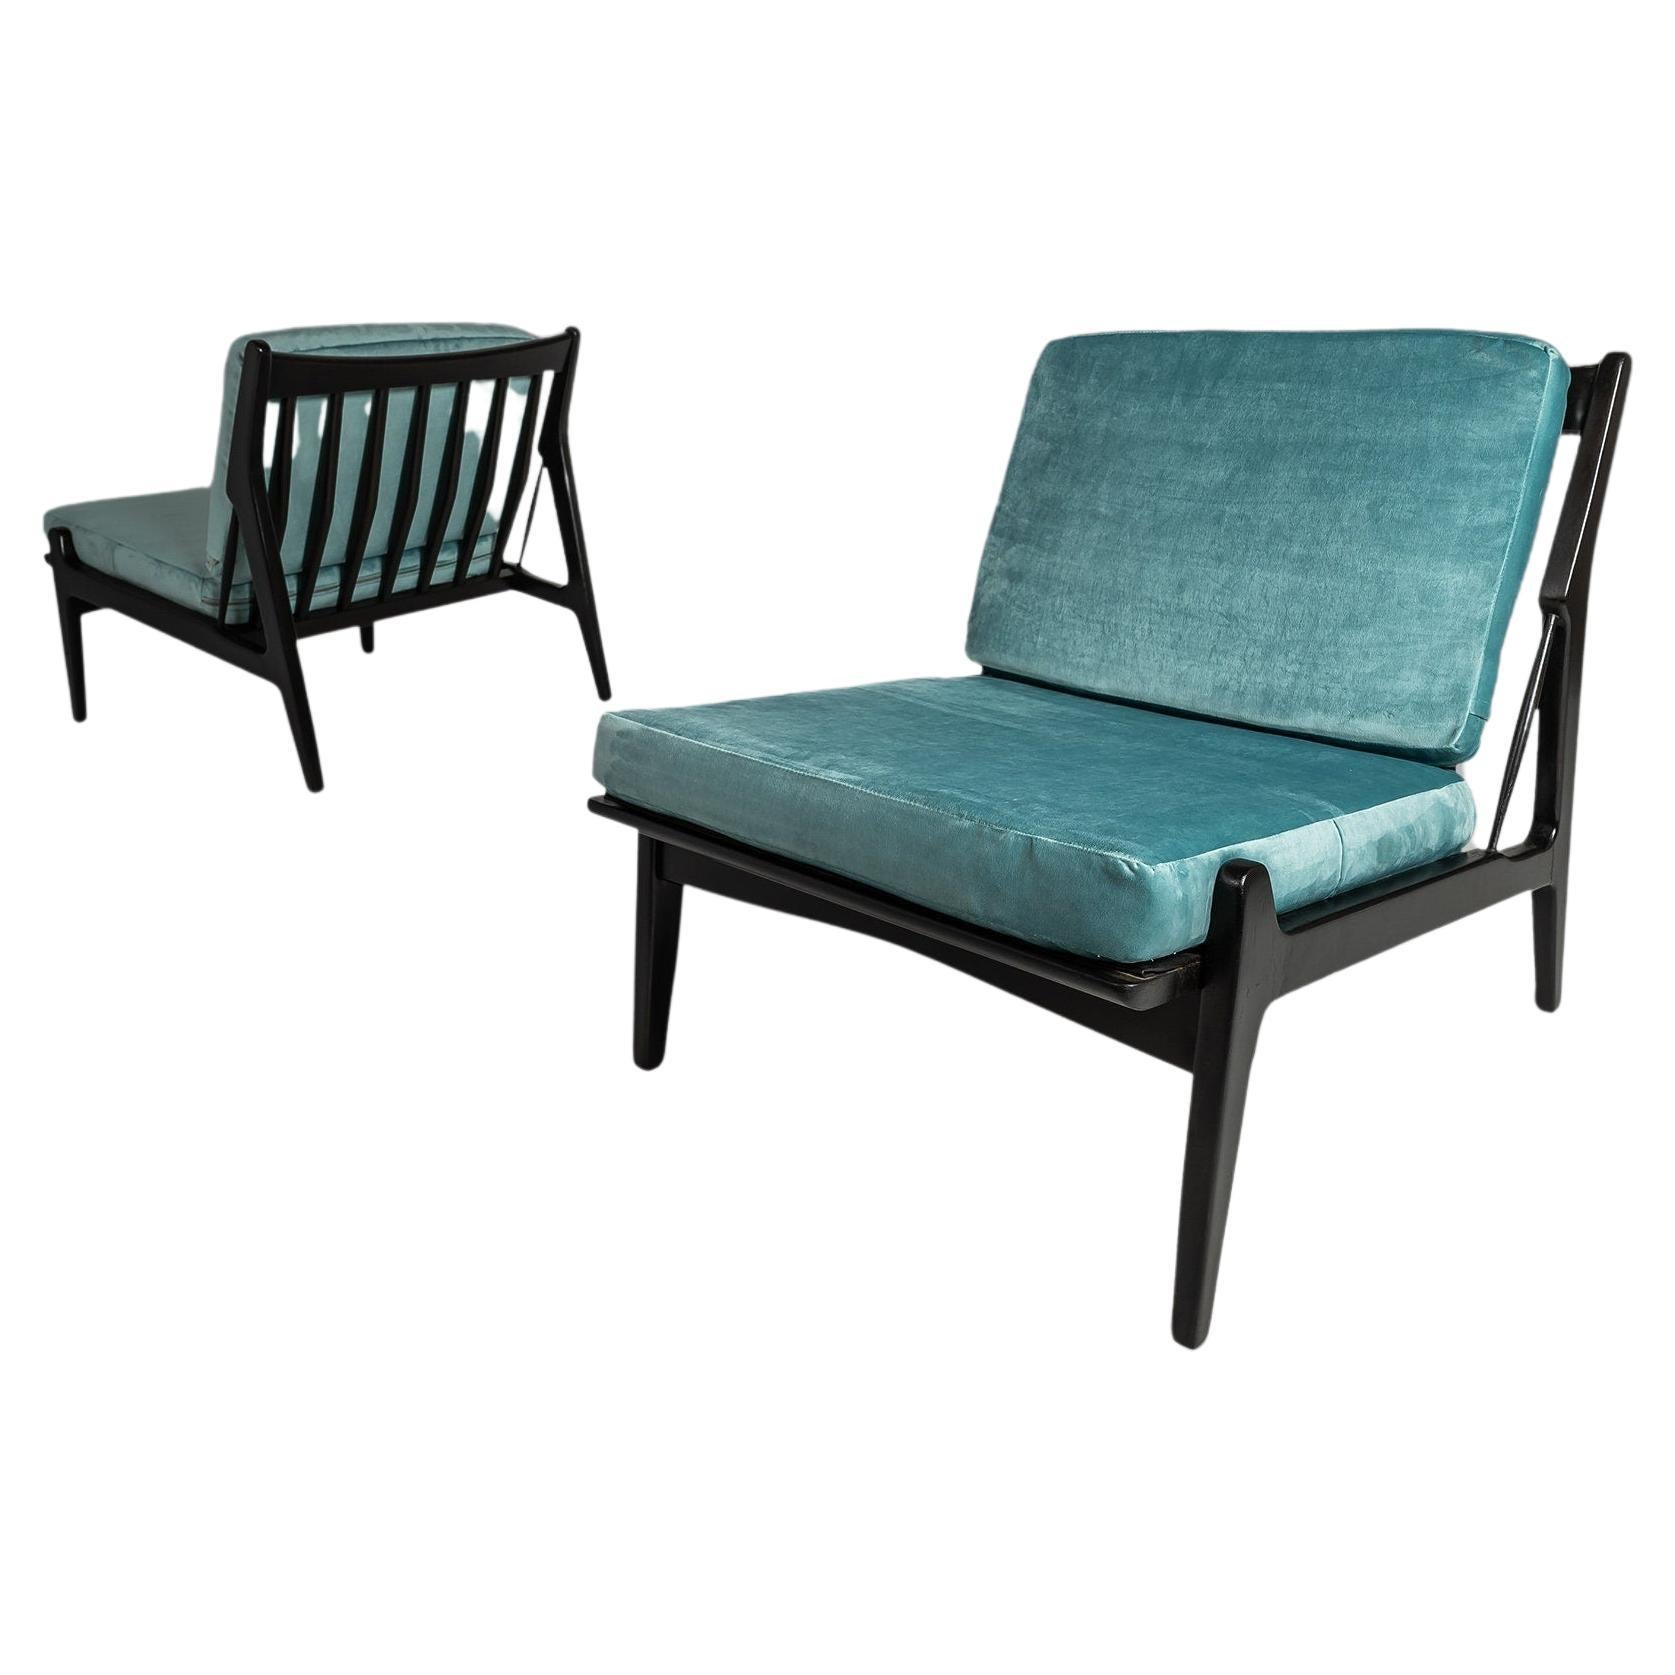 Set of Two '2' Rare Lounge Chairs by Ib Kofod Larsen for Selig, Denmark, C. 1950 For Sale